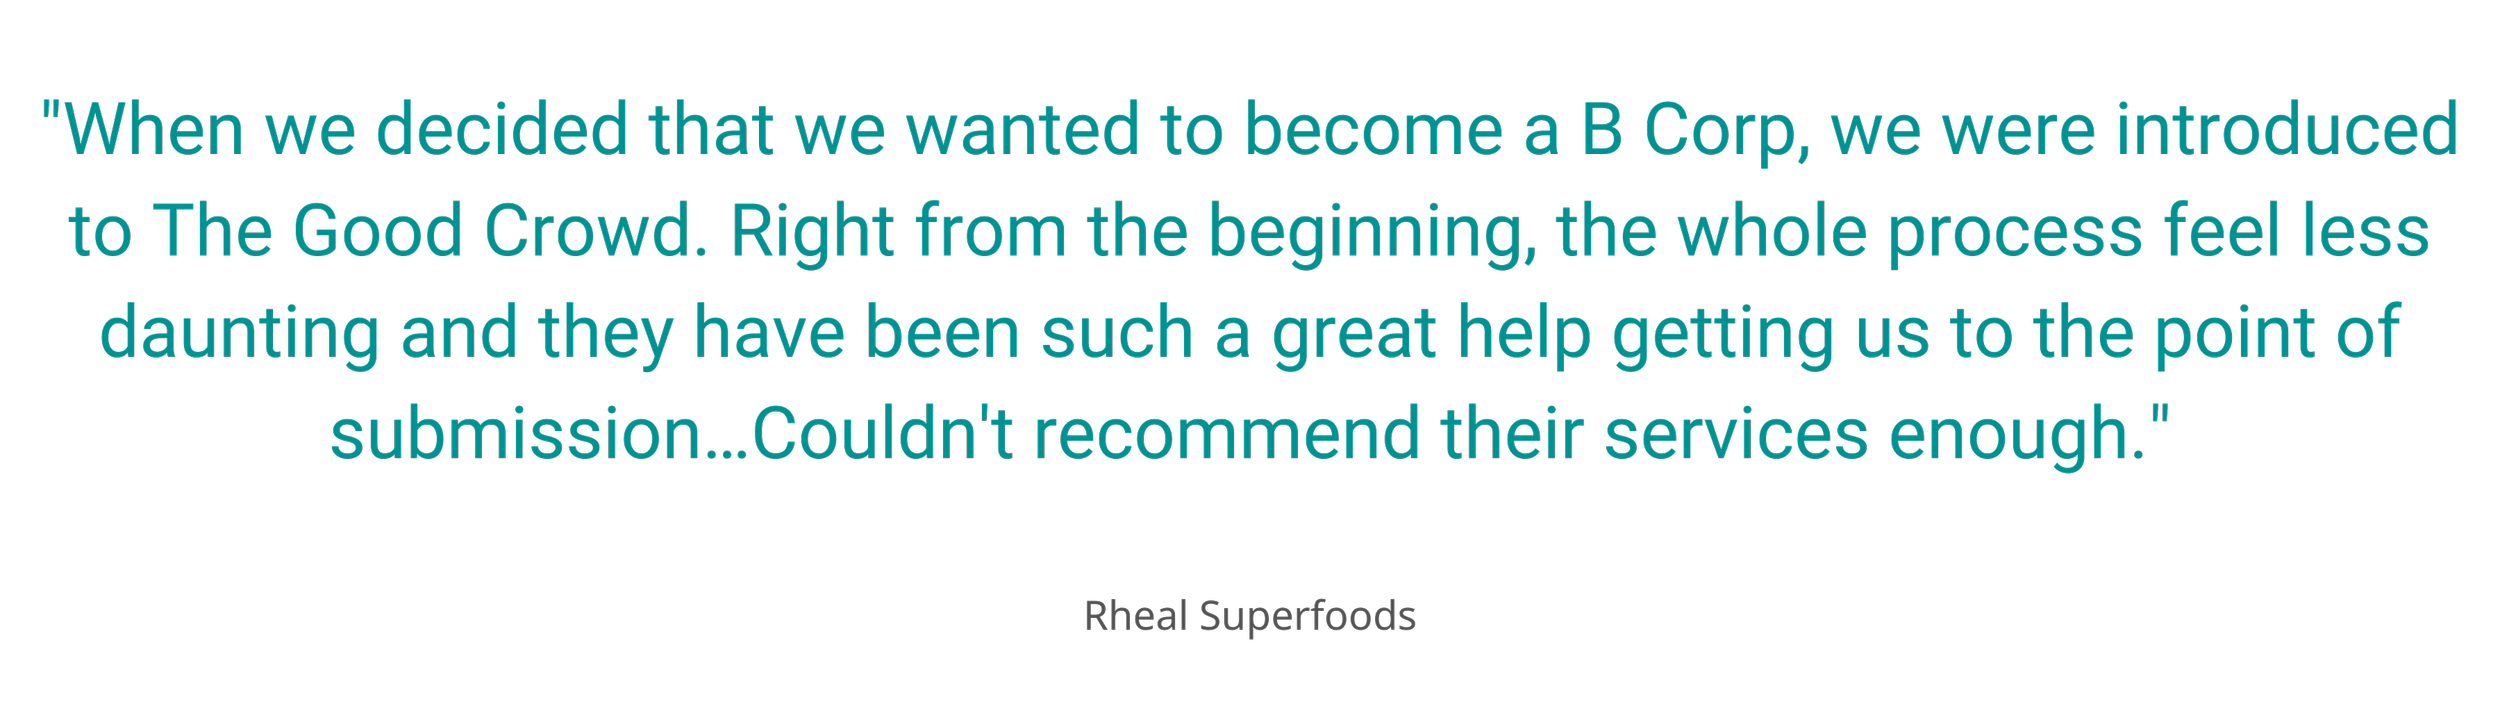 Rheal superfoods.png